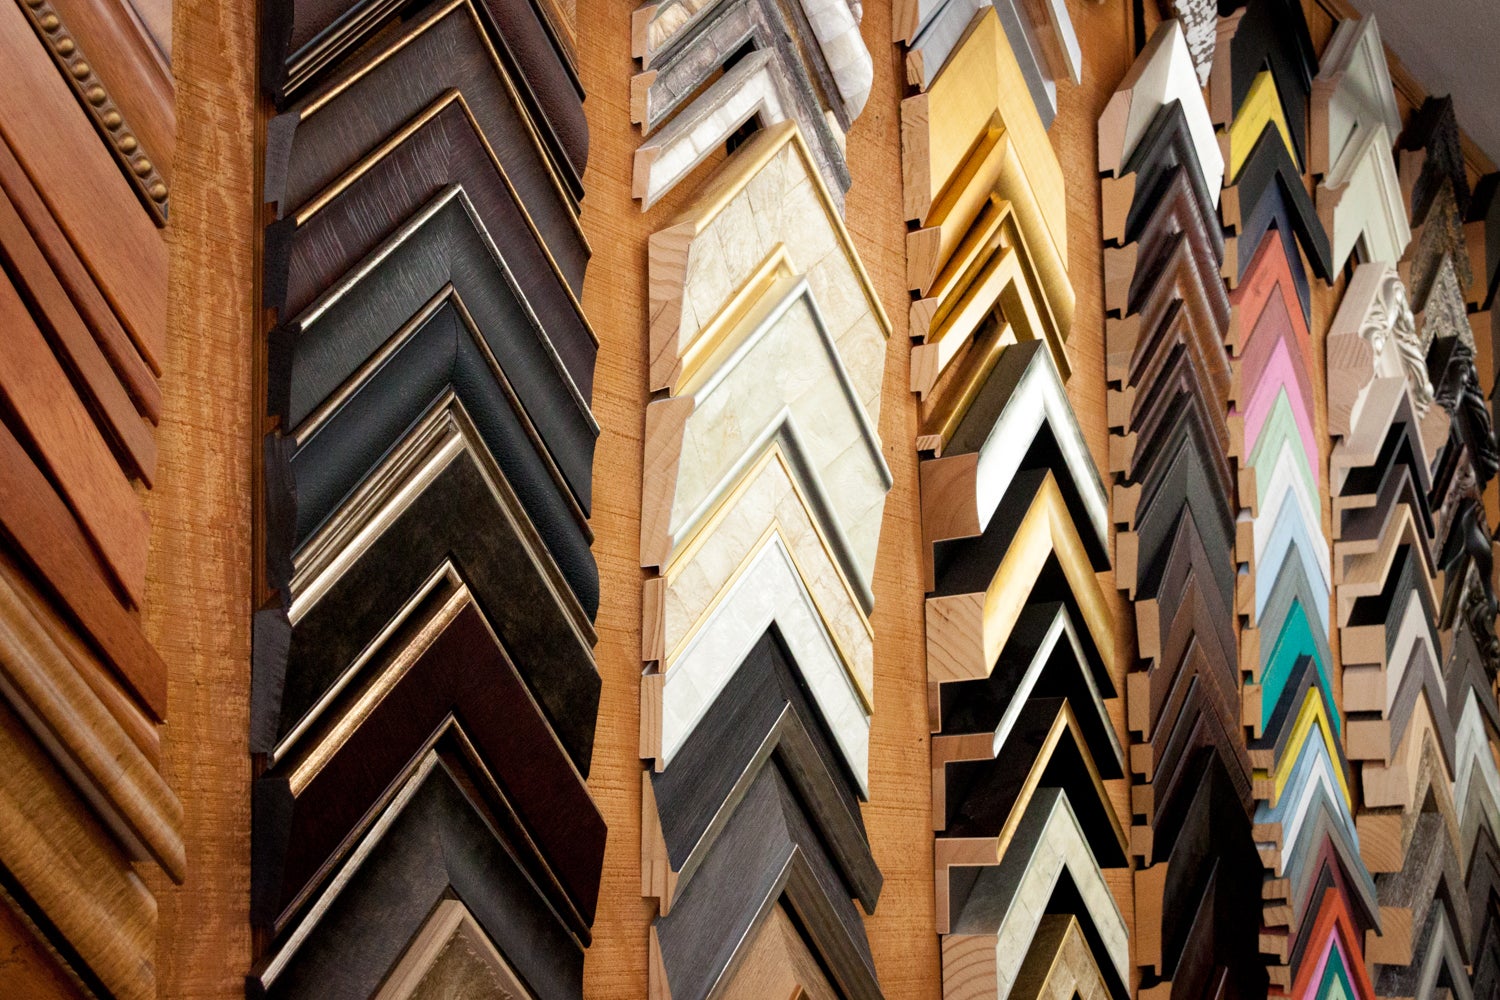 Framing Services: Manders Picture Framing Services